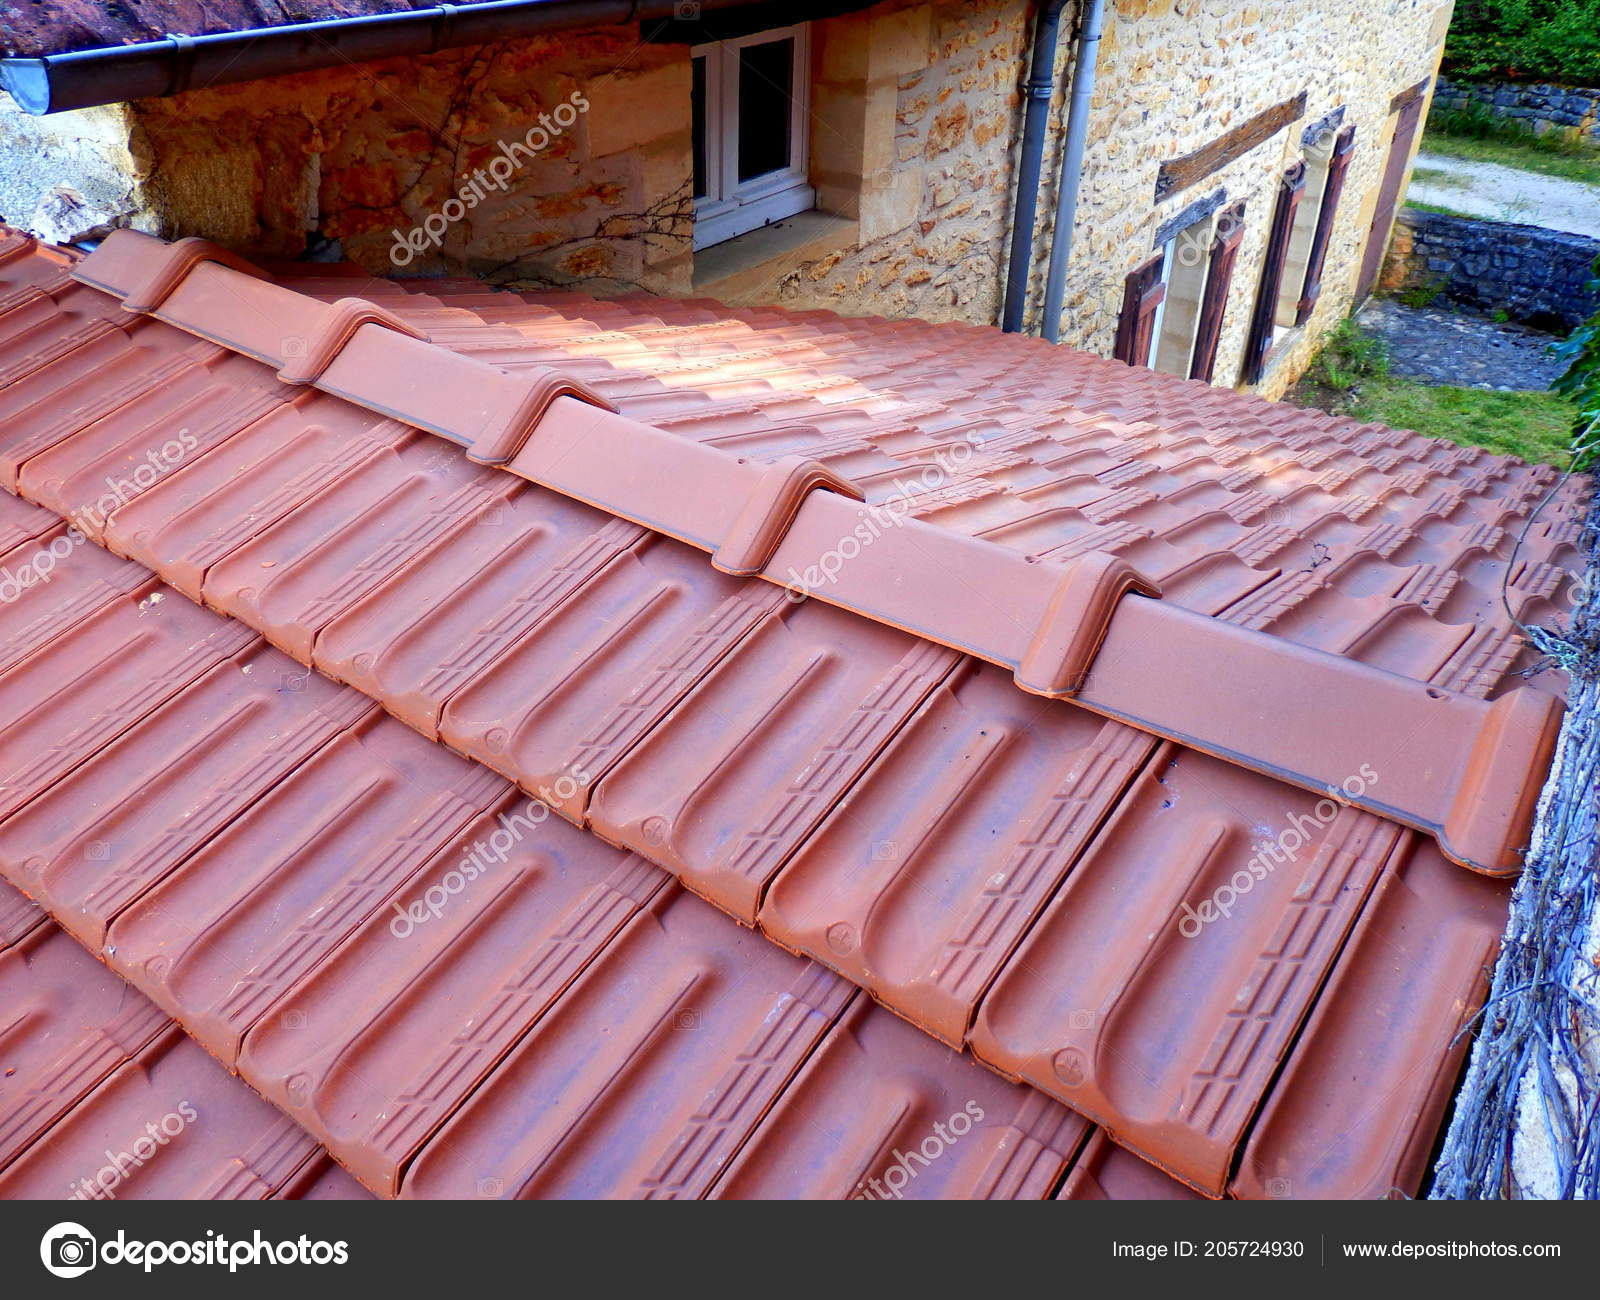 New Roof Tiles Installed Replacement, Old Tile Replacement